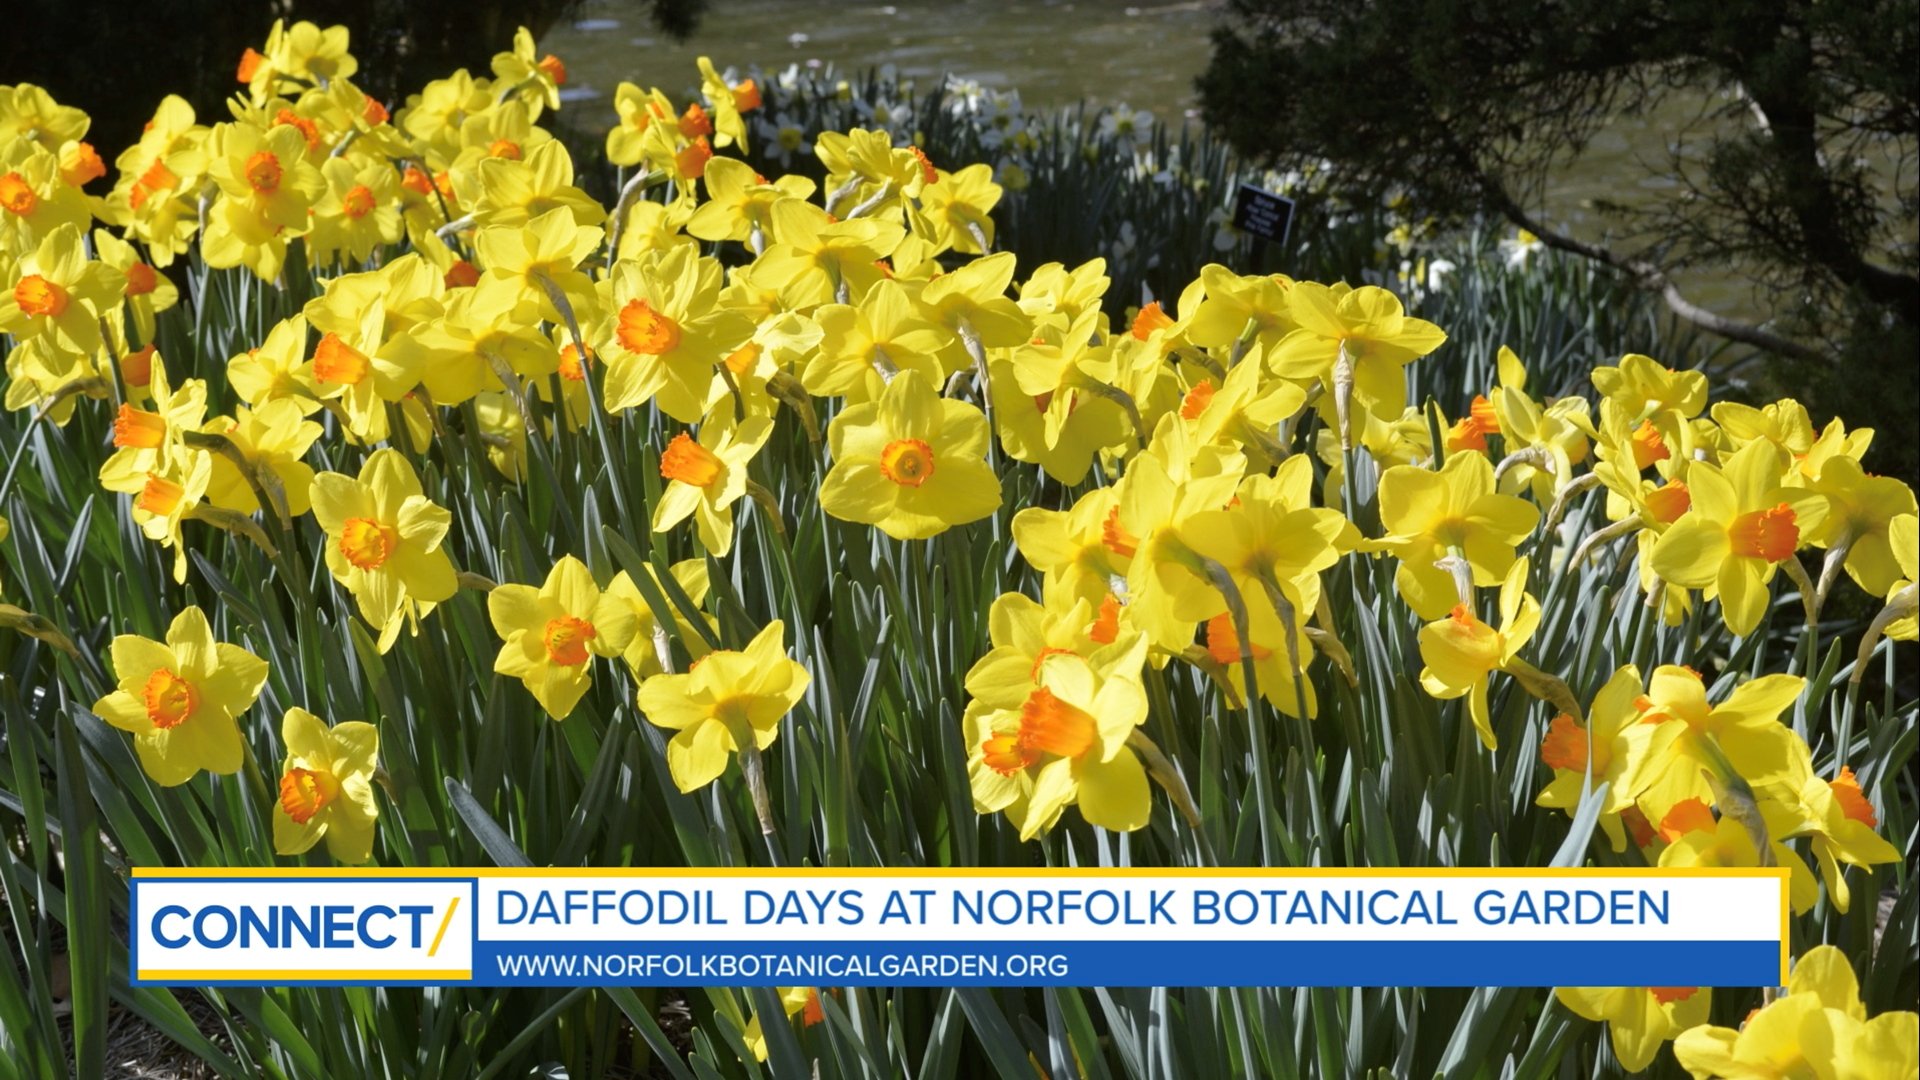 March is the peak season for daffodils. Les Park shares how easy it is to care for the flower and how to see the over 400,000 blooms at Norfolk Botanical Garden.